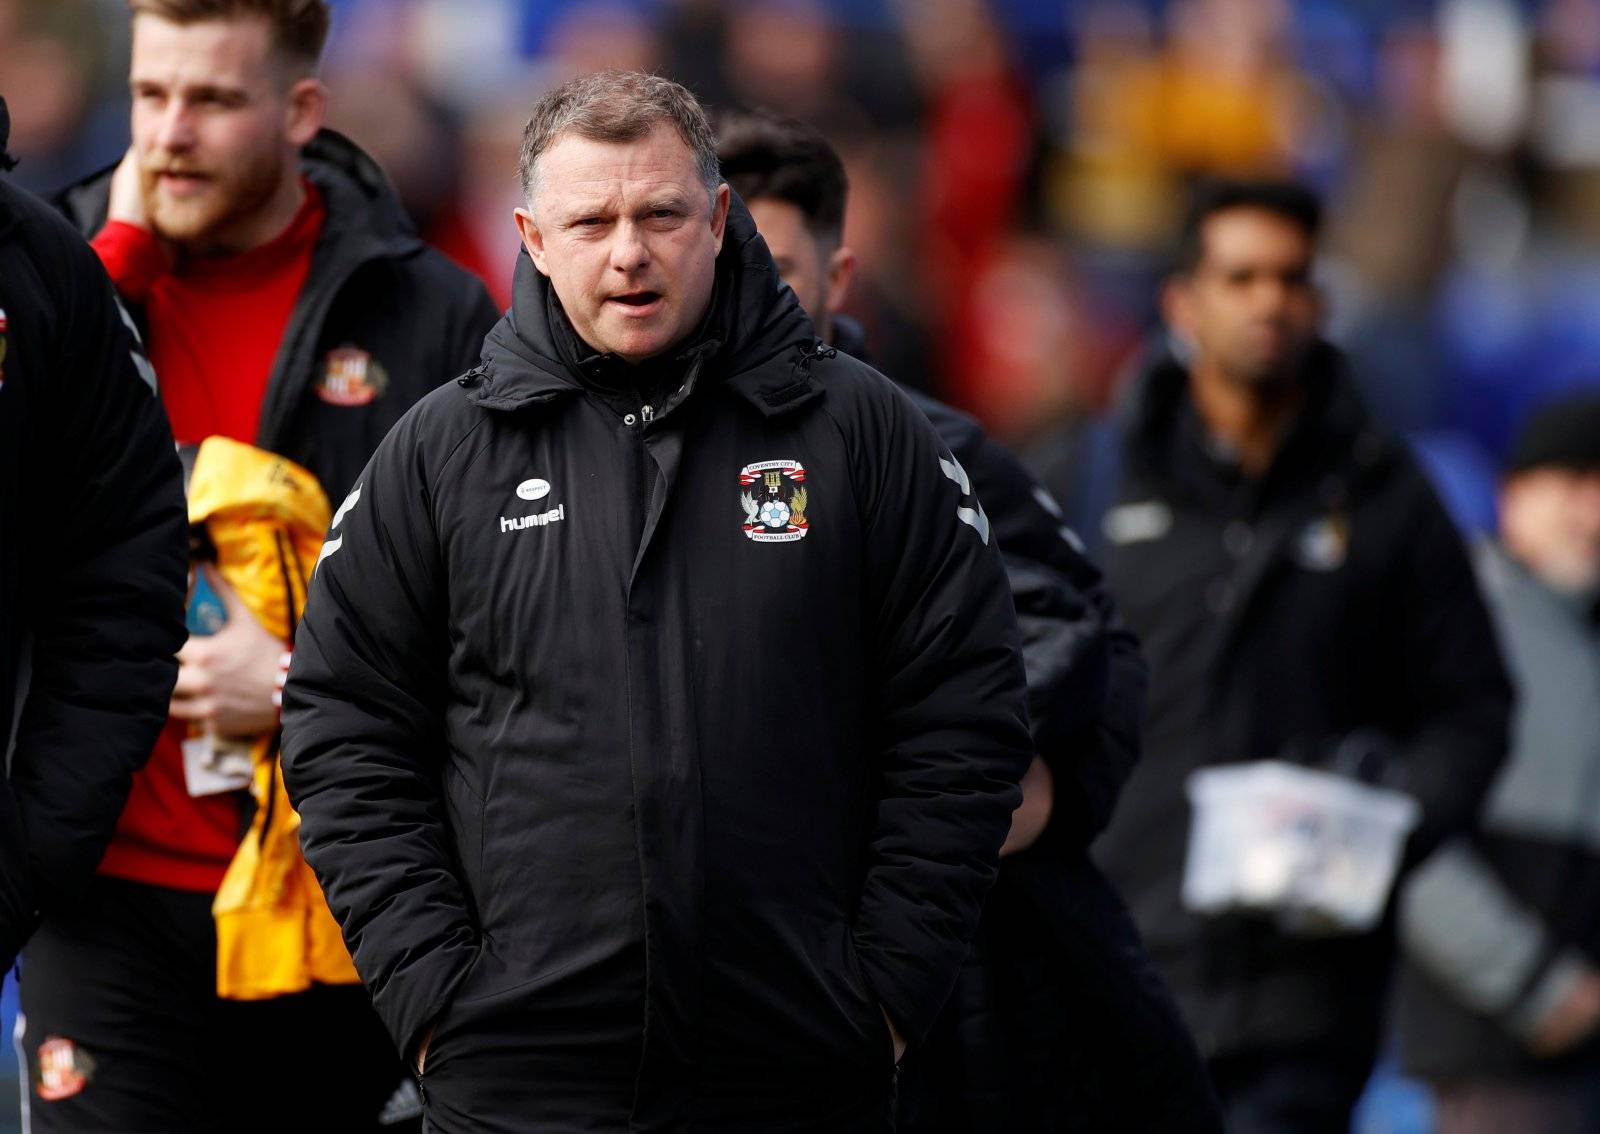 Coventry: Mark Robins approached by Bournemouth - Bournemouth News